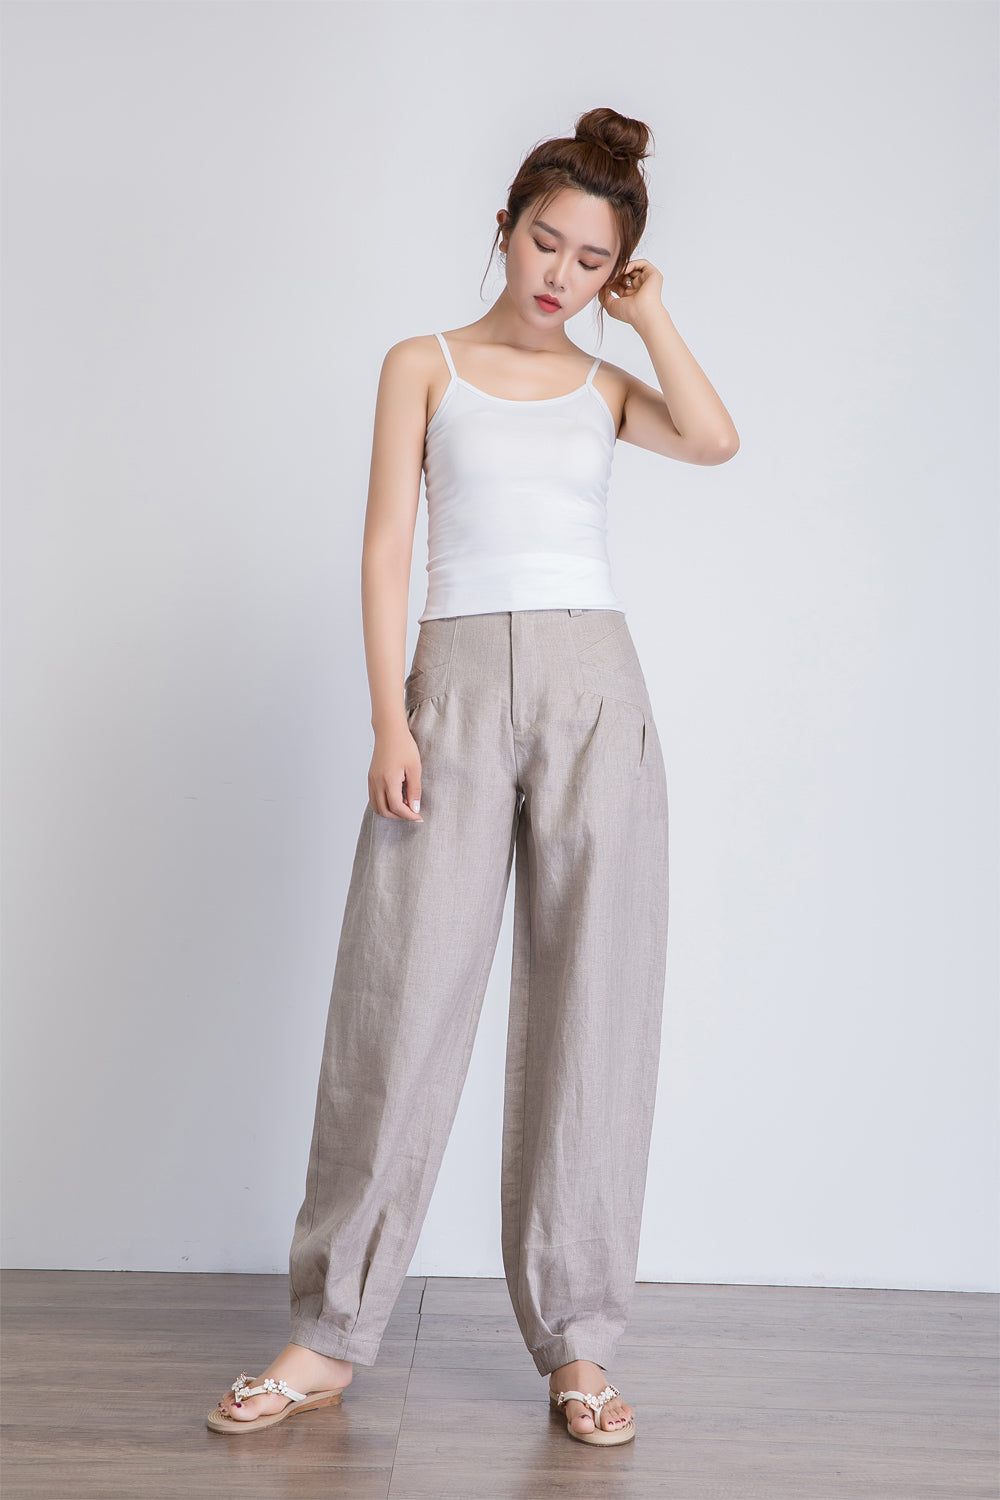 Waisted Solid Women's Trousers Mid Leg Casual Wide Straight Baggy Pants  Women's | eBay